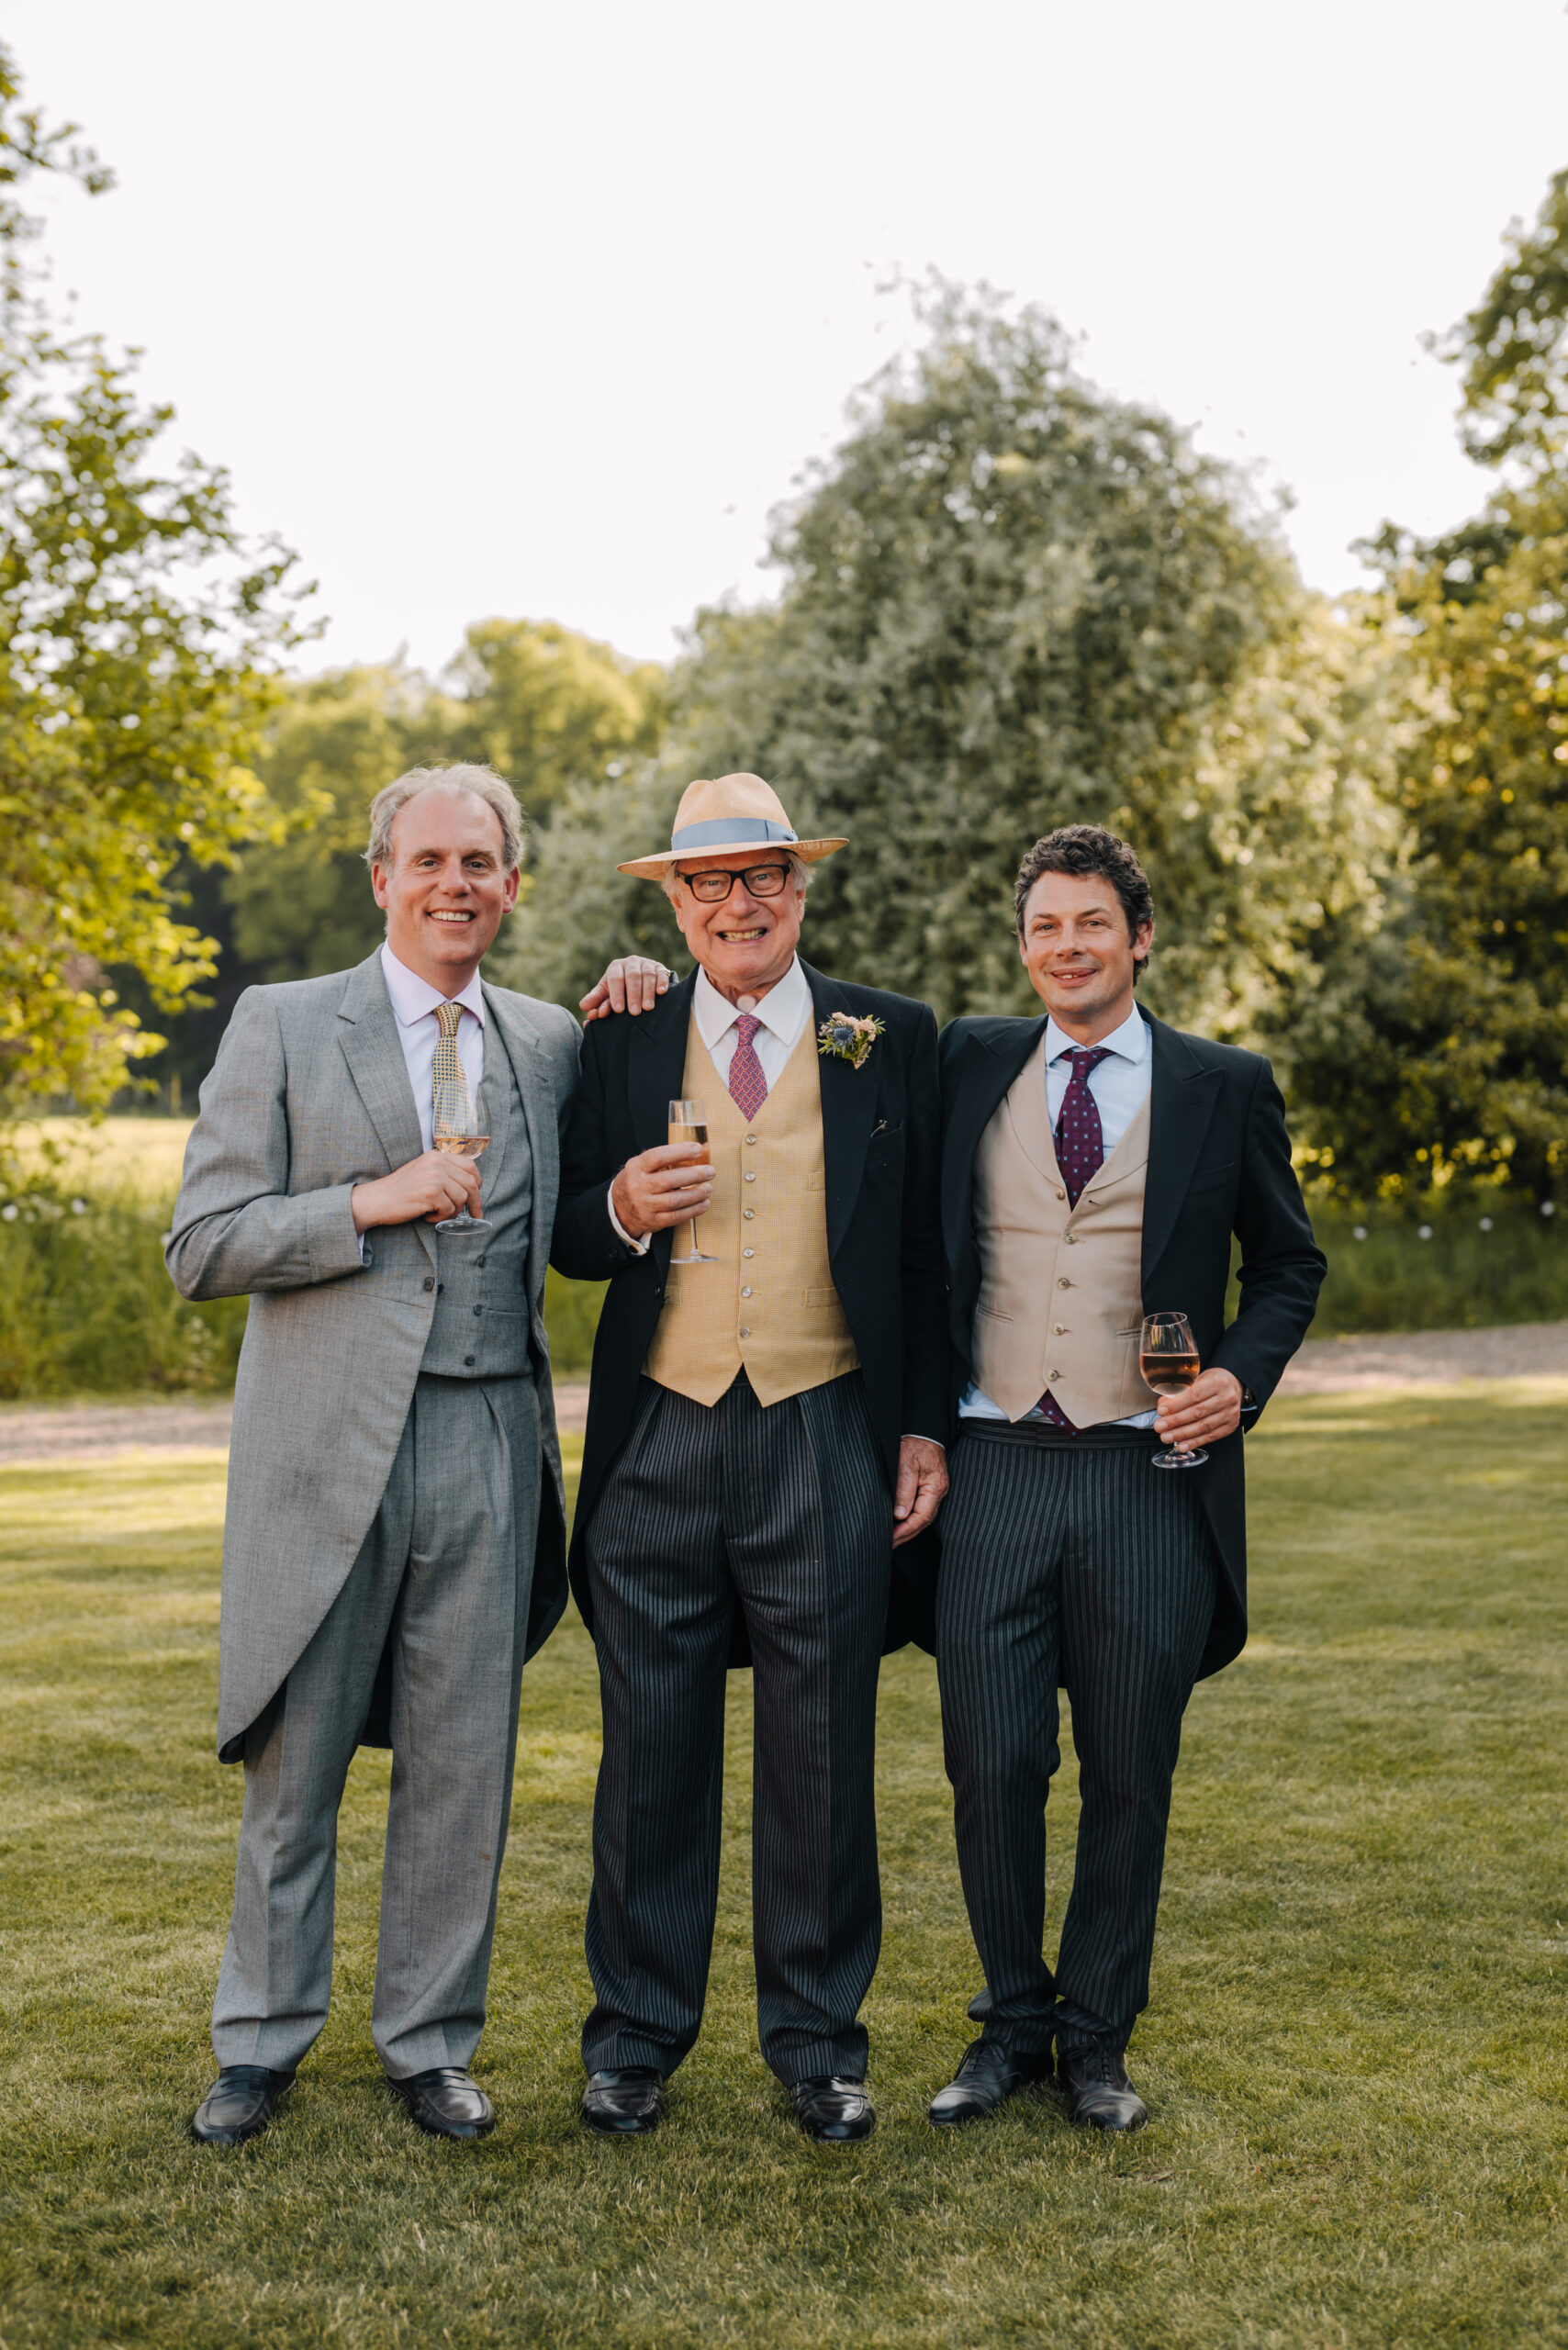 Three men wearing morning suits stand outside on a manicured lawn with mature trees in the background posing for the camera.